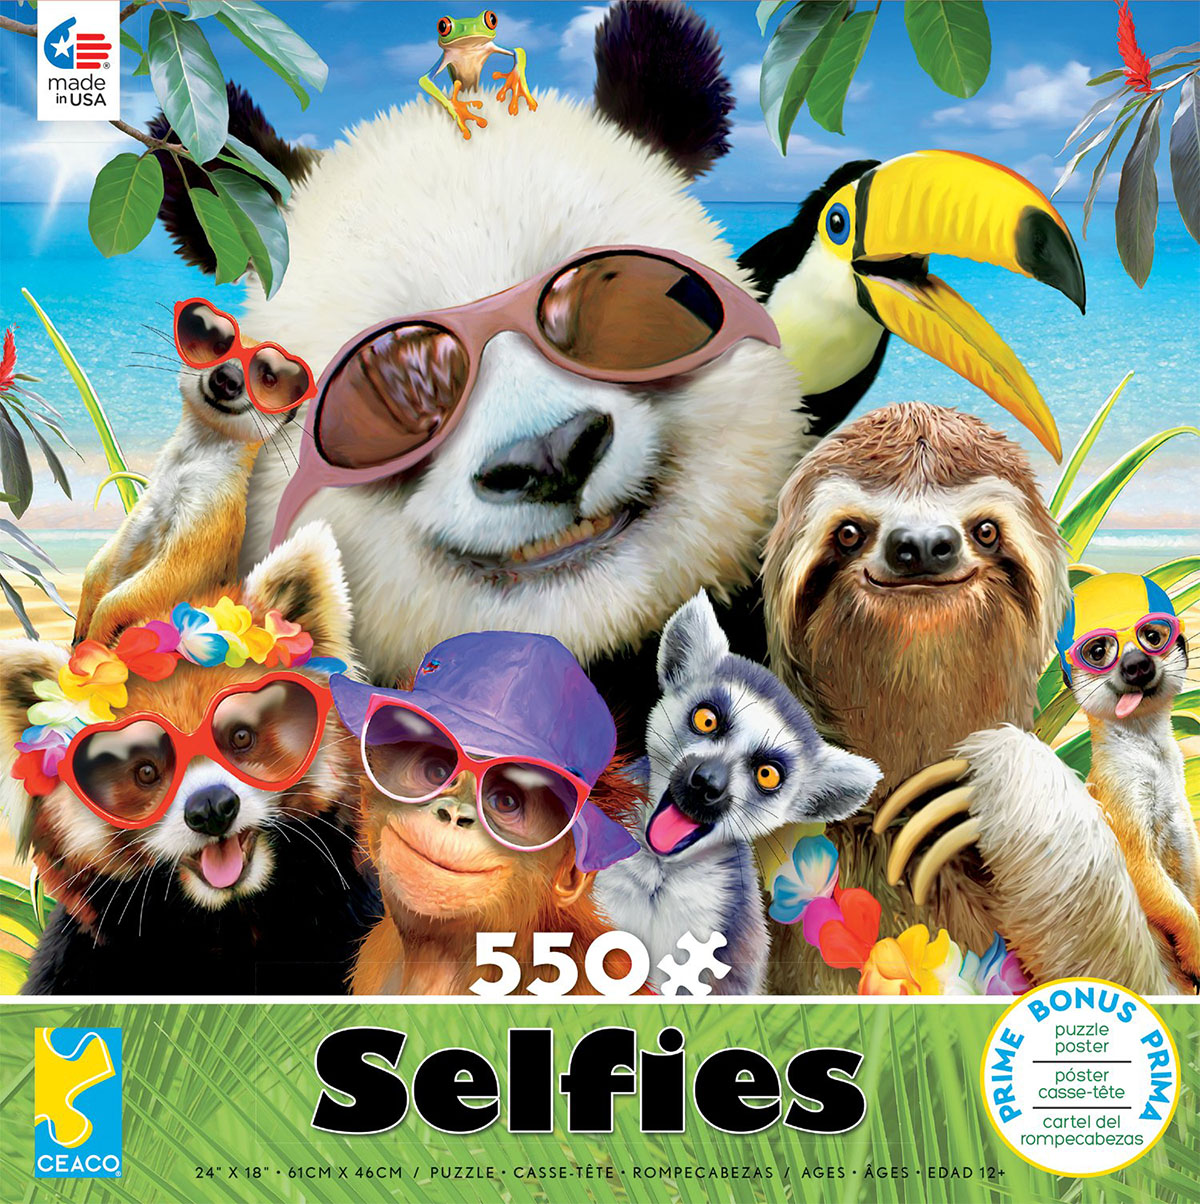 Beach Party Panda (Selfies) - Scratch and Dent